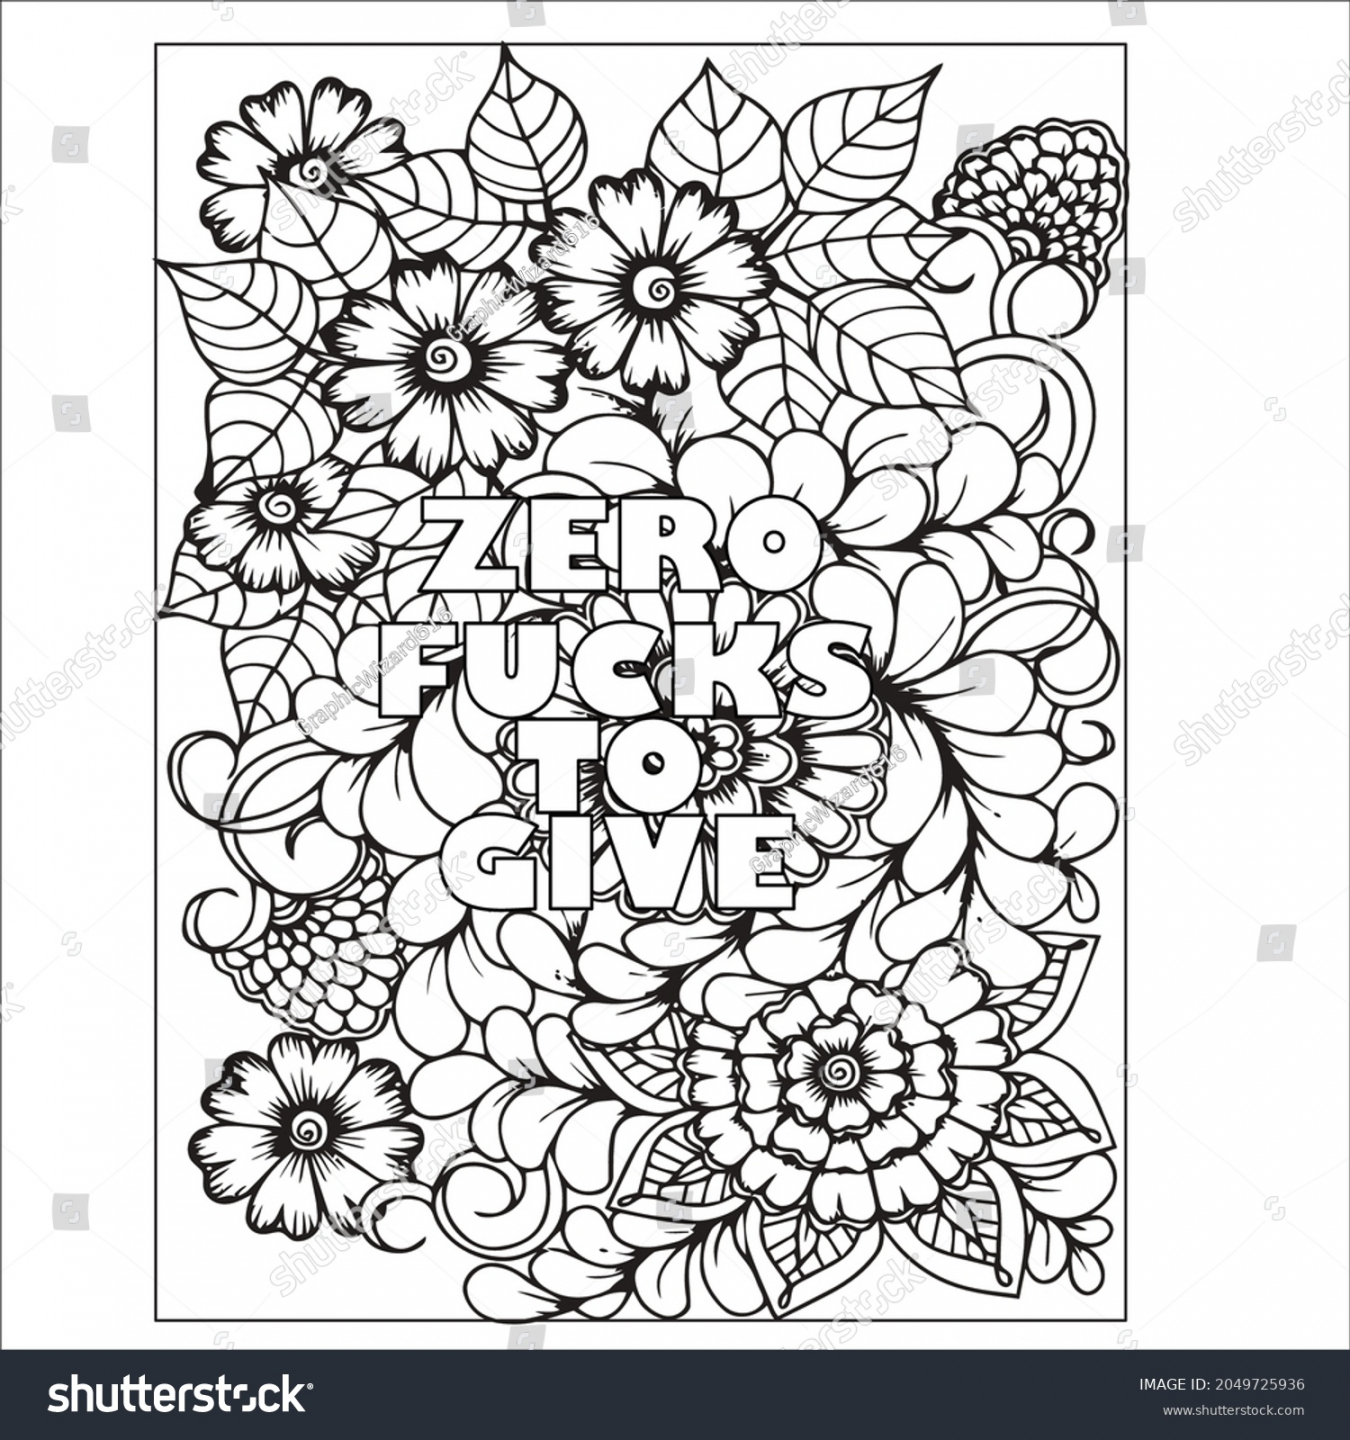 Free Printable Inappropriate Coloring Pages For Adults - Printable - , Swear Words Coloring Images, Stock Photos & Vectors